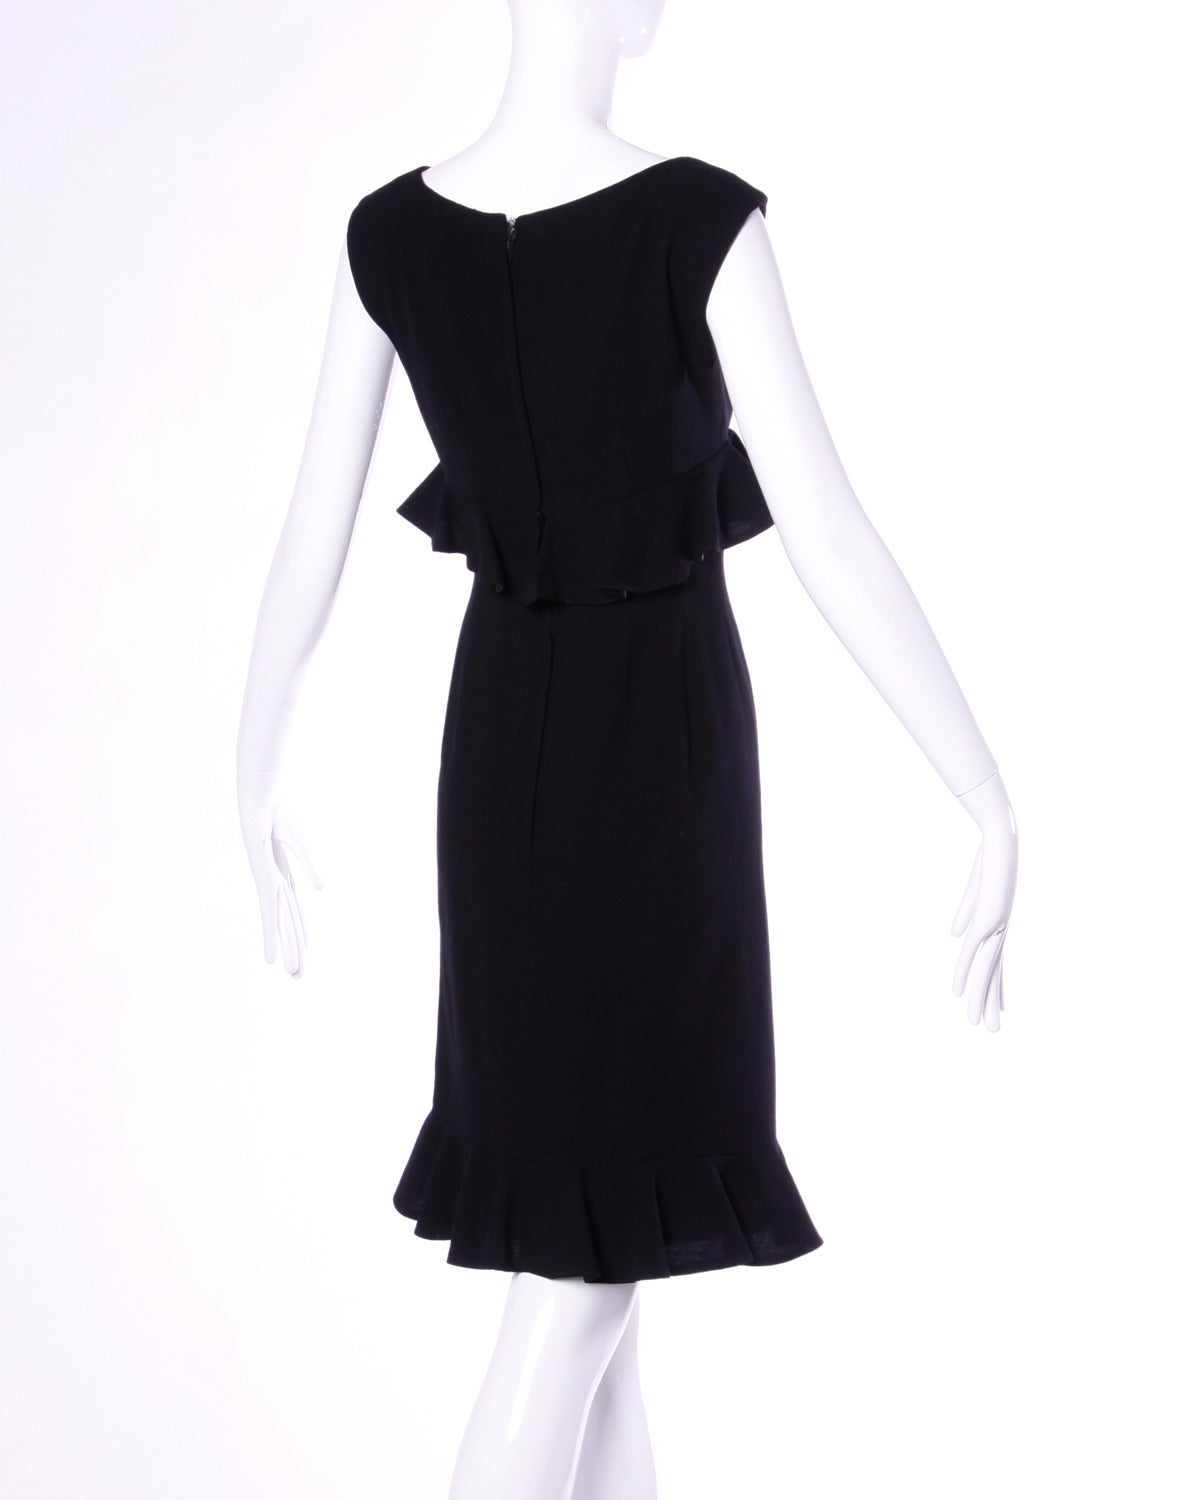 Flattering vintage cocktail dress by one of our favorite vintage designers: Wilson Folmar for Edward Abbott. Simple and chic with ruffles that accentuate the tiny waist on this dress. 

Details:

Fully Lined
Back Zip and Hook Closure
Estimated